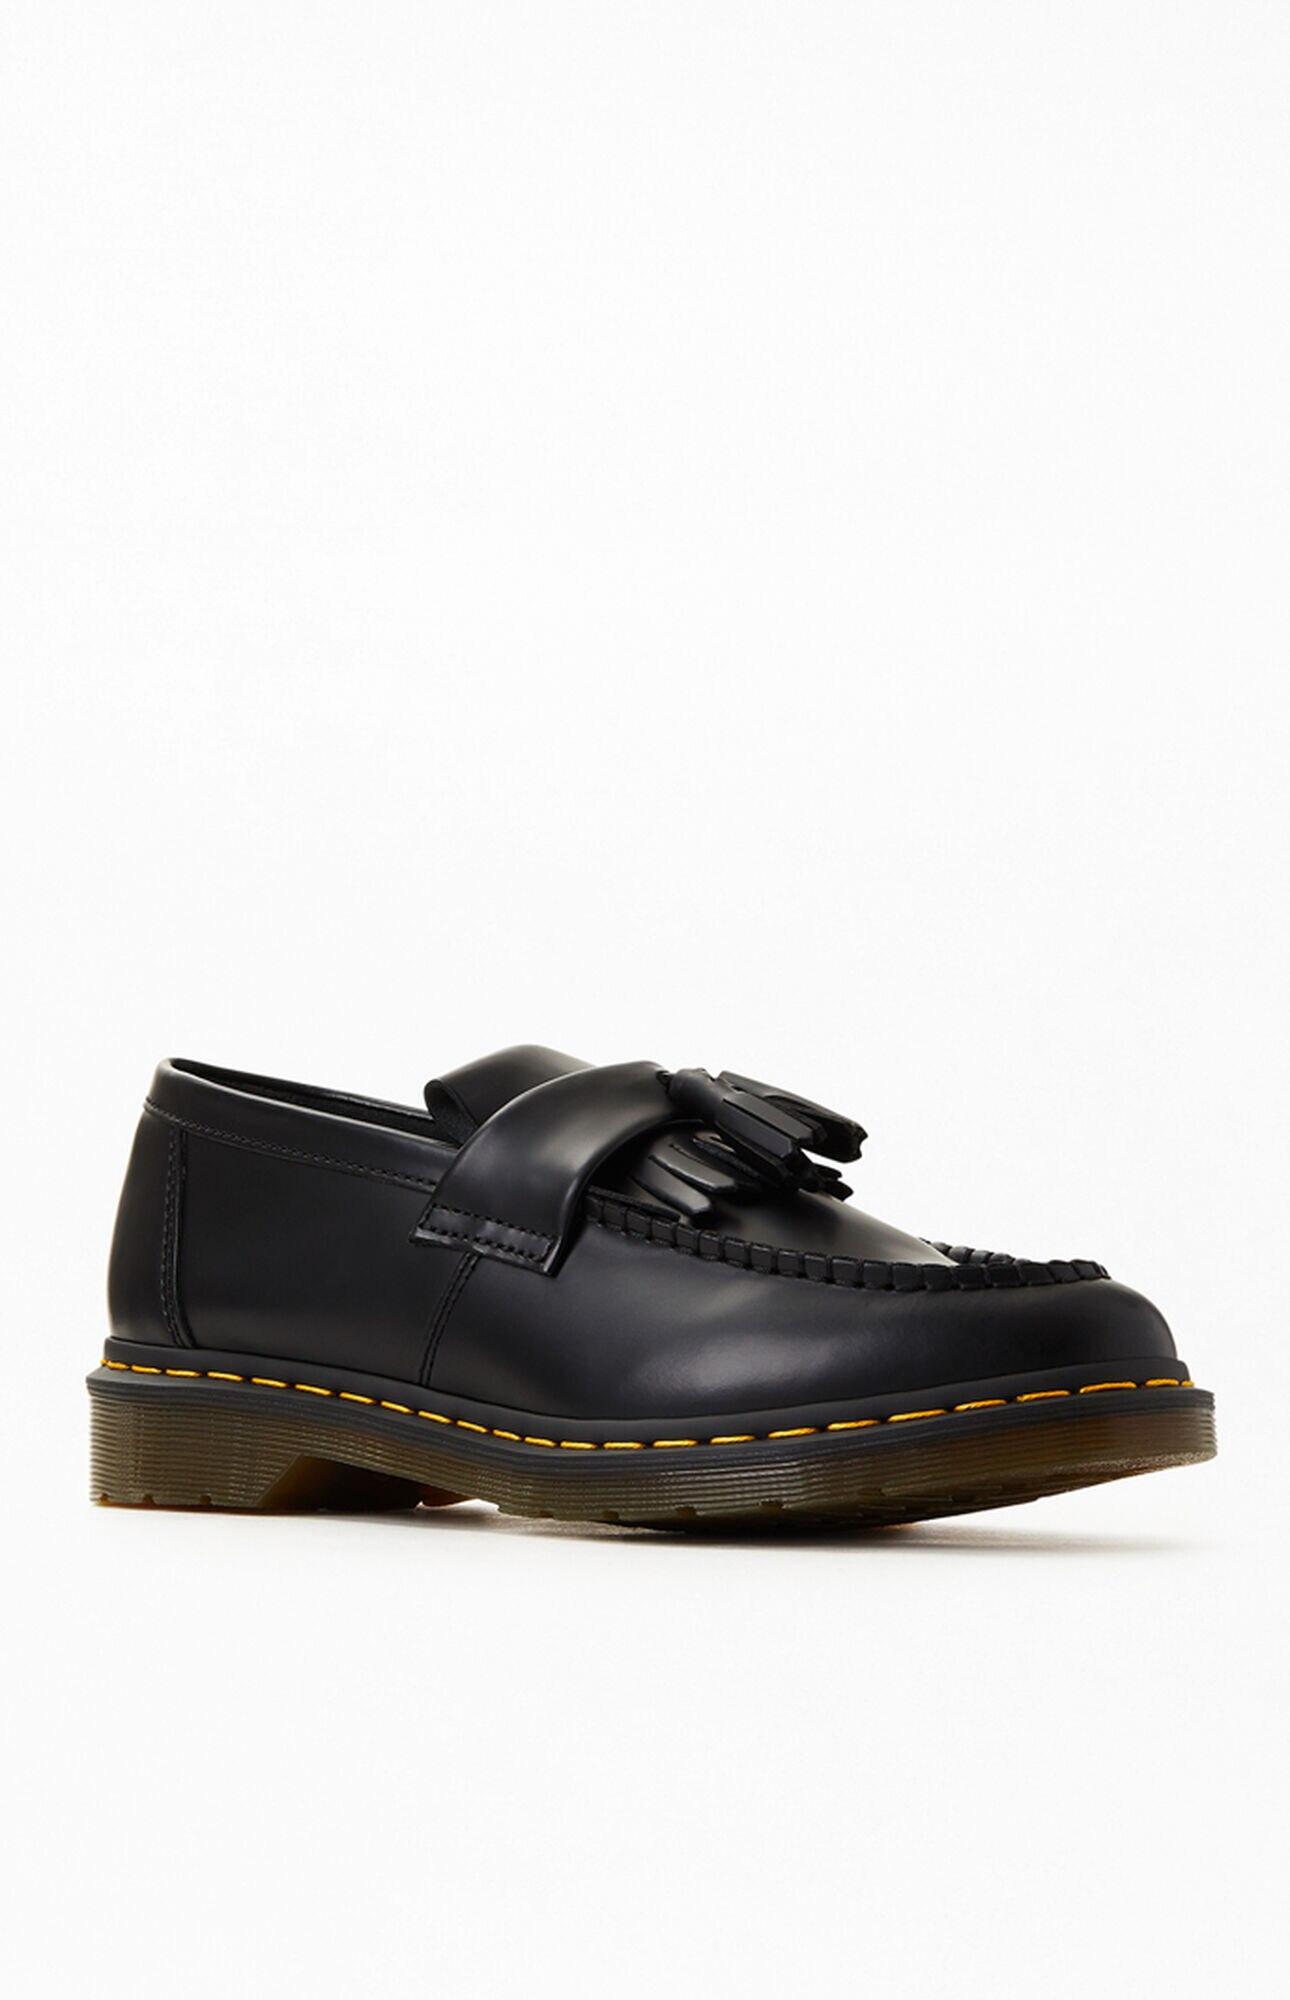 Dr. Martens Adrian Yellow Stitch Leather Loafers in Black for Men - Lyst